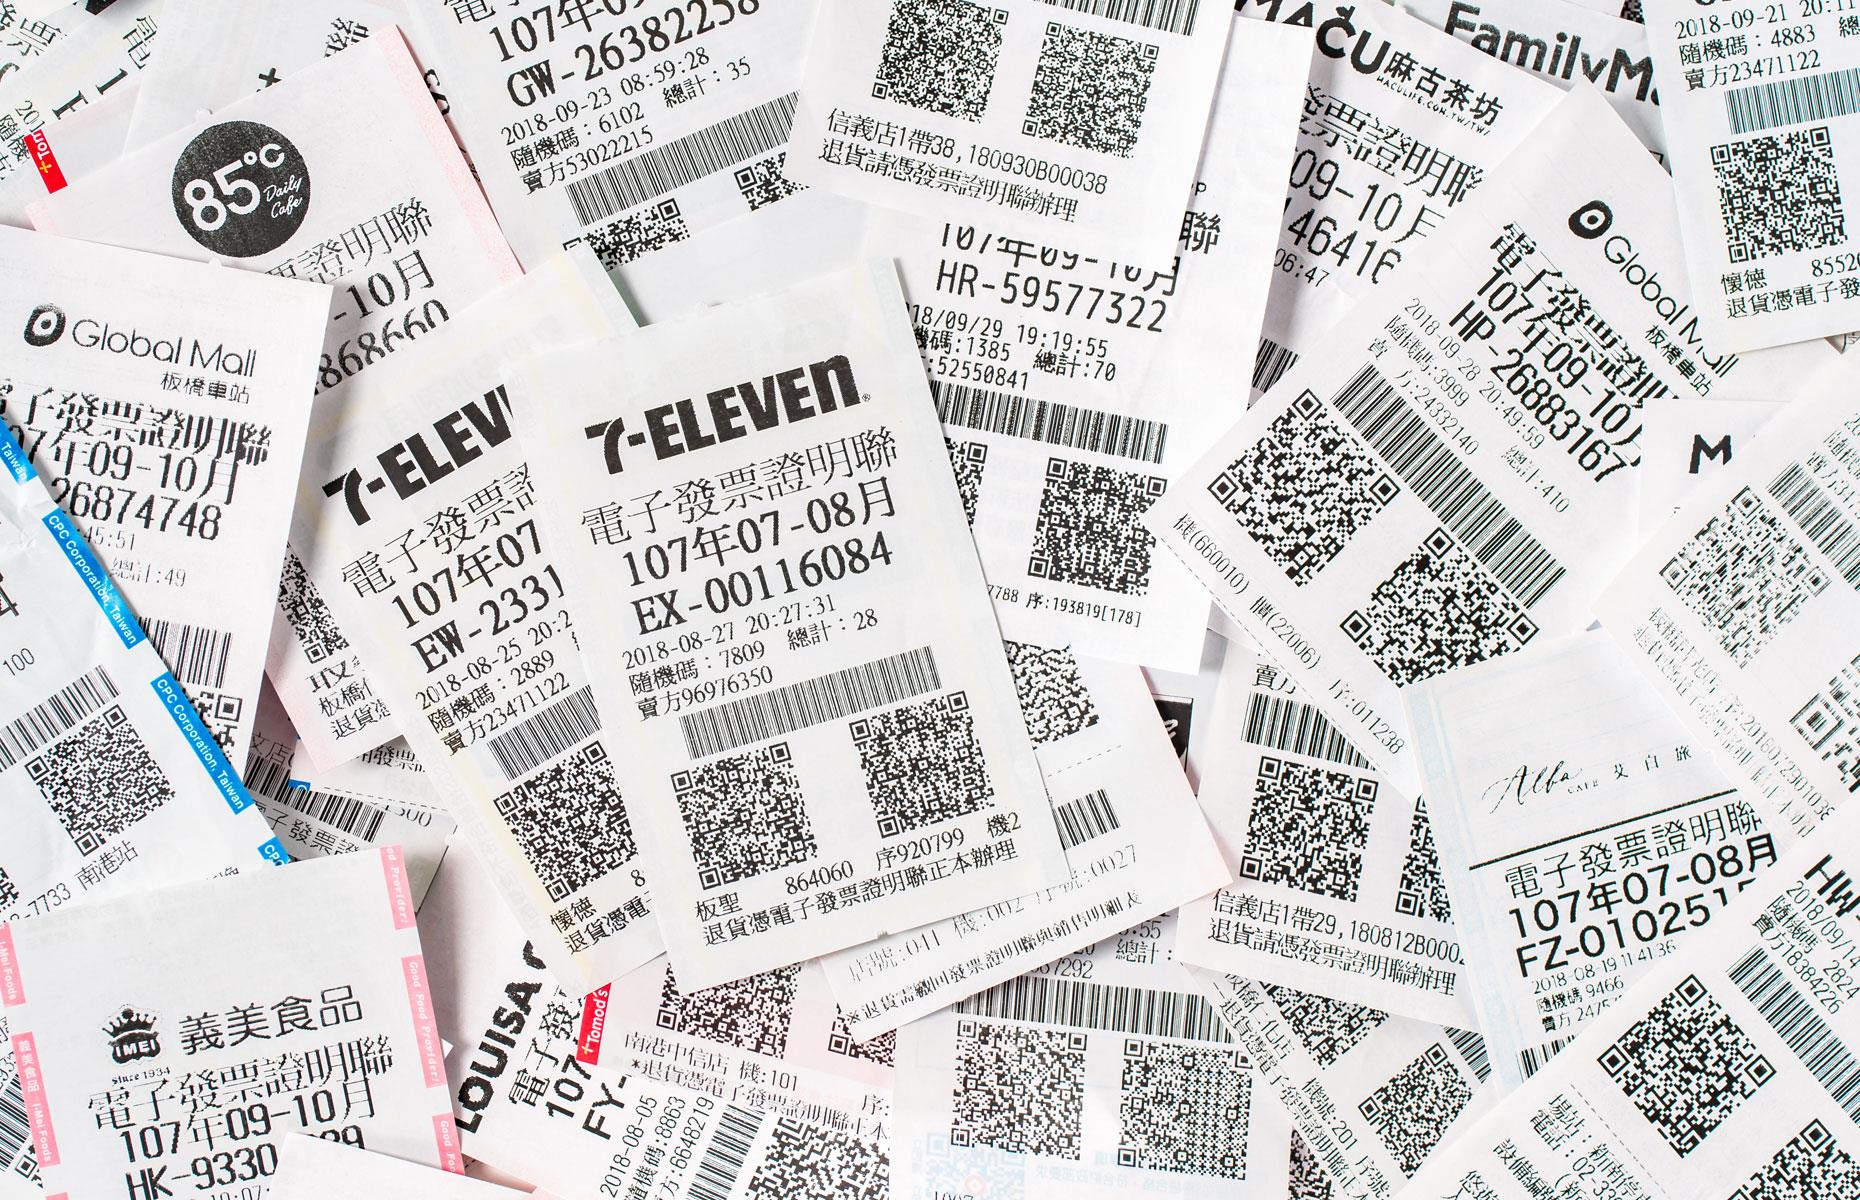 Taiwan: Lottery for shop customers